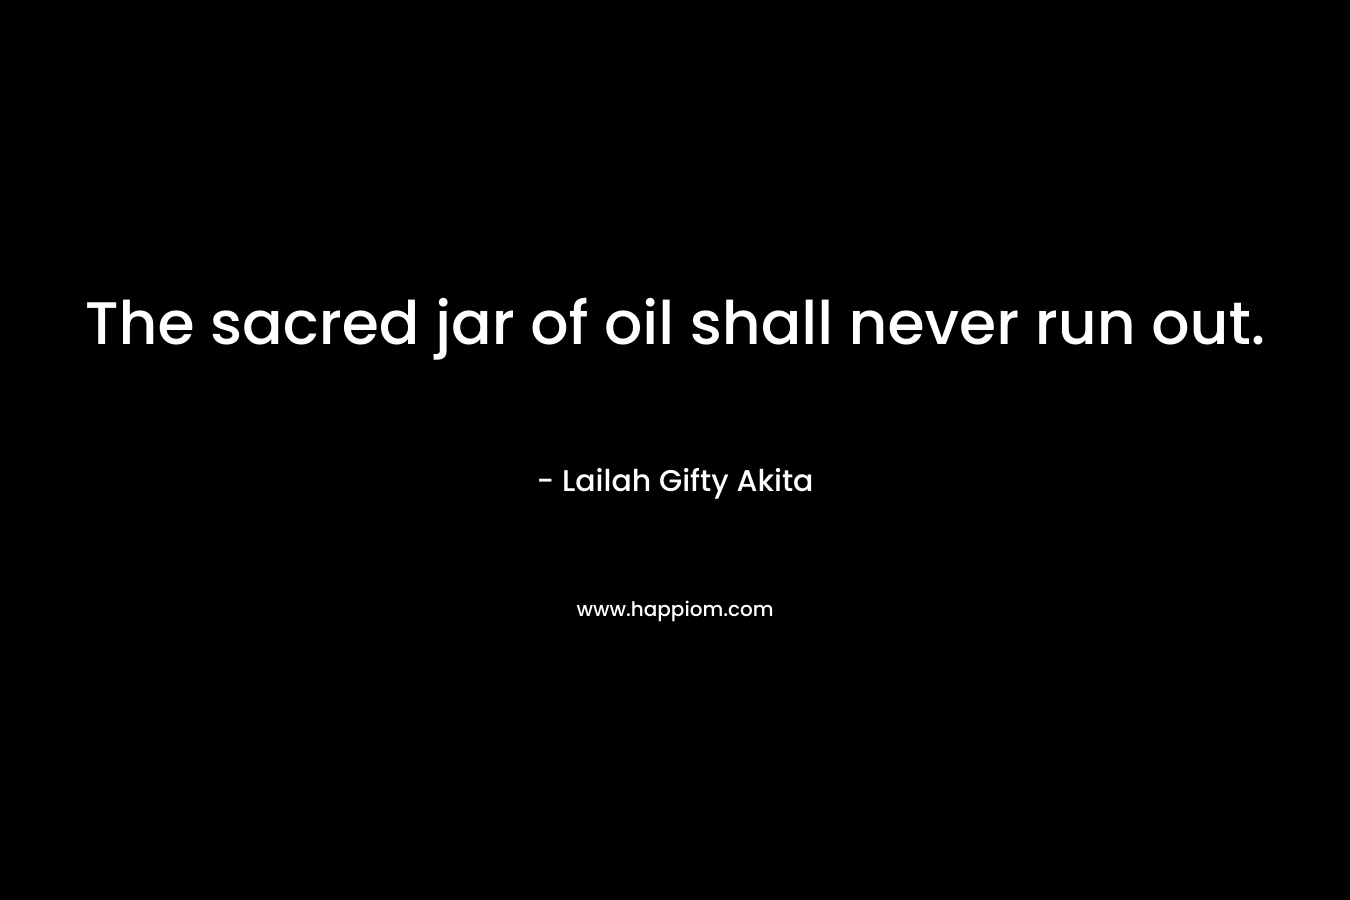 The sacred jar of oil shall never run out.